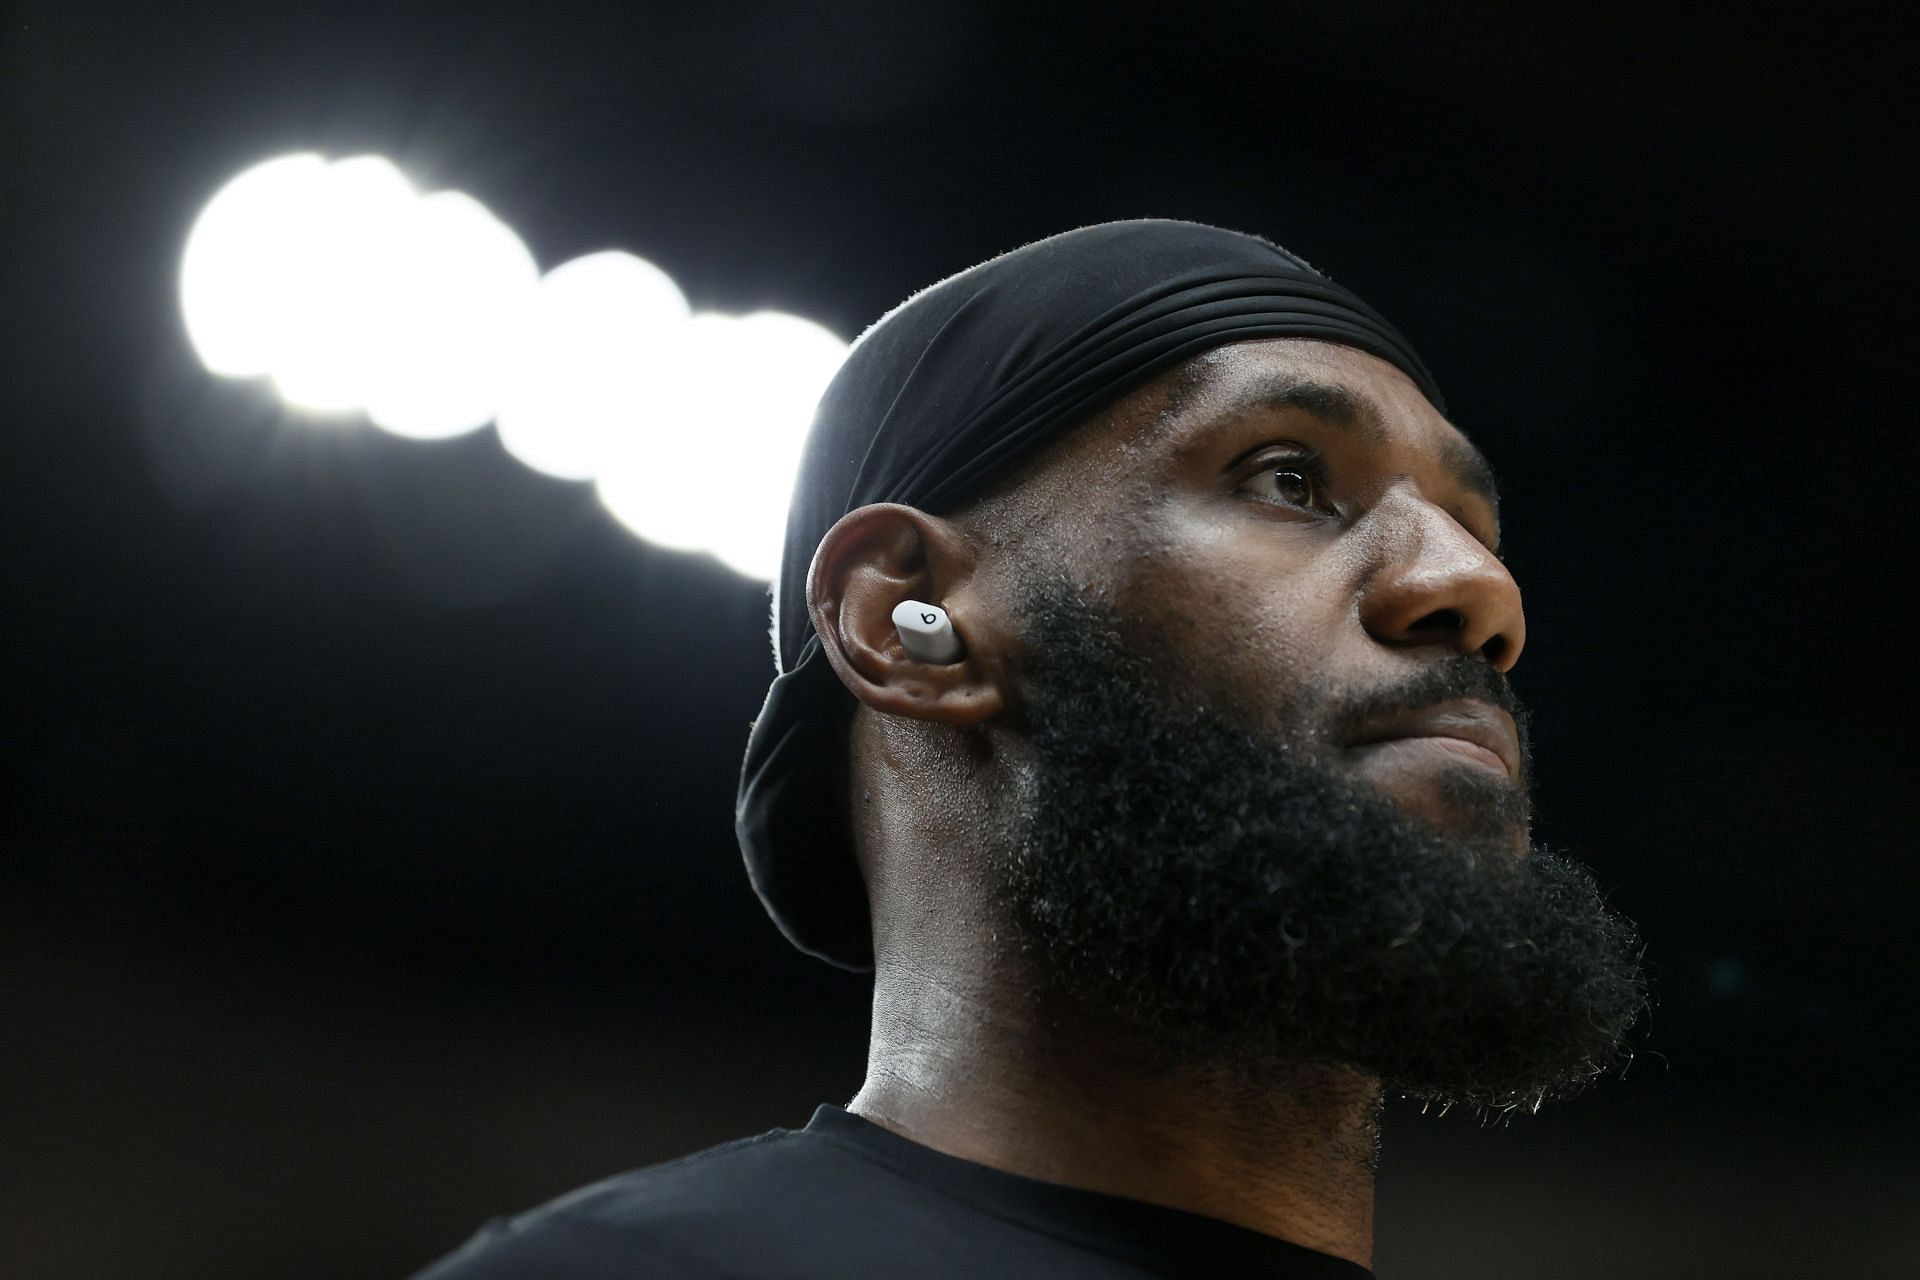 LeBron James #6 of the Los Angeles Lakers before game against the Portland Trail Blazers.